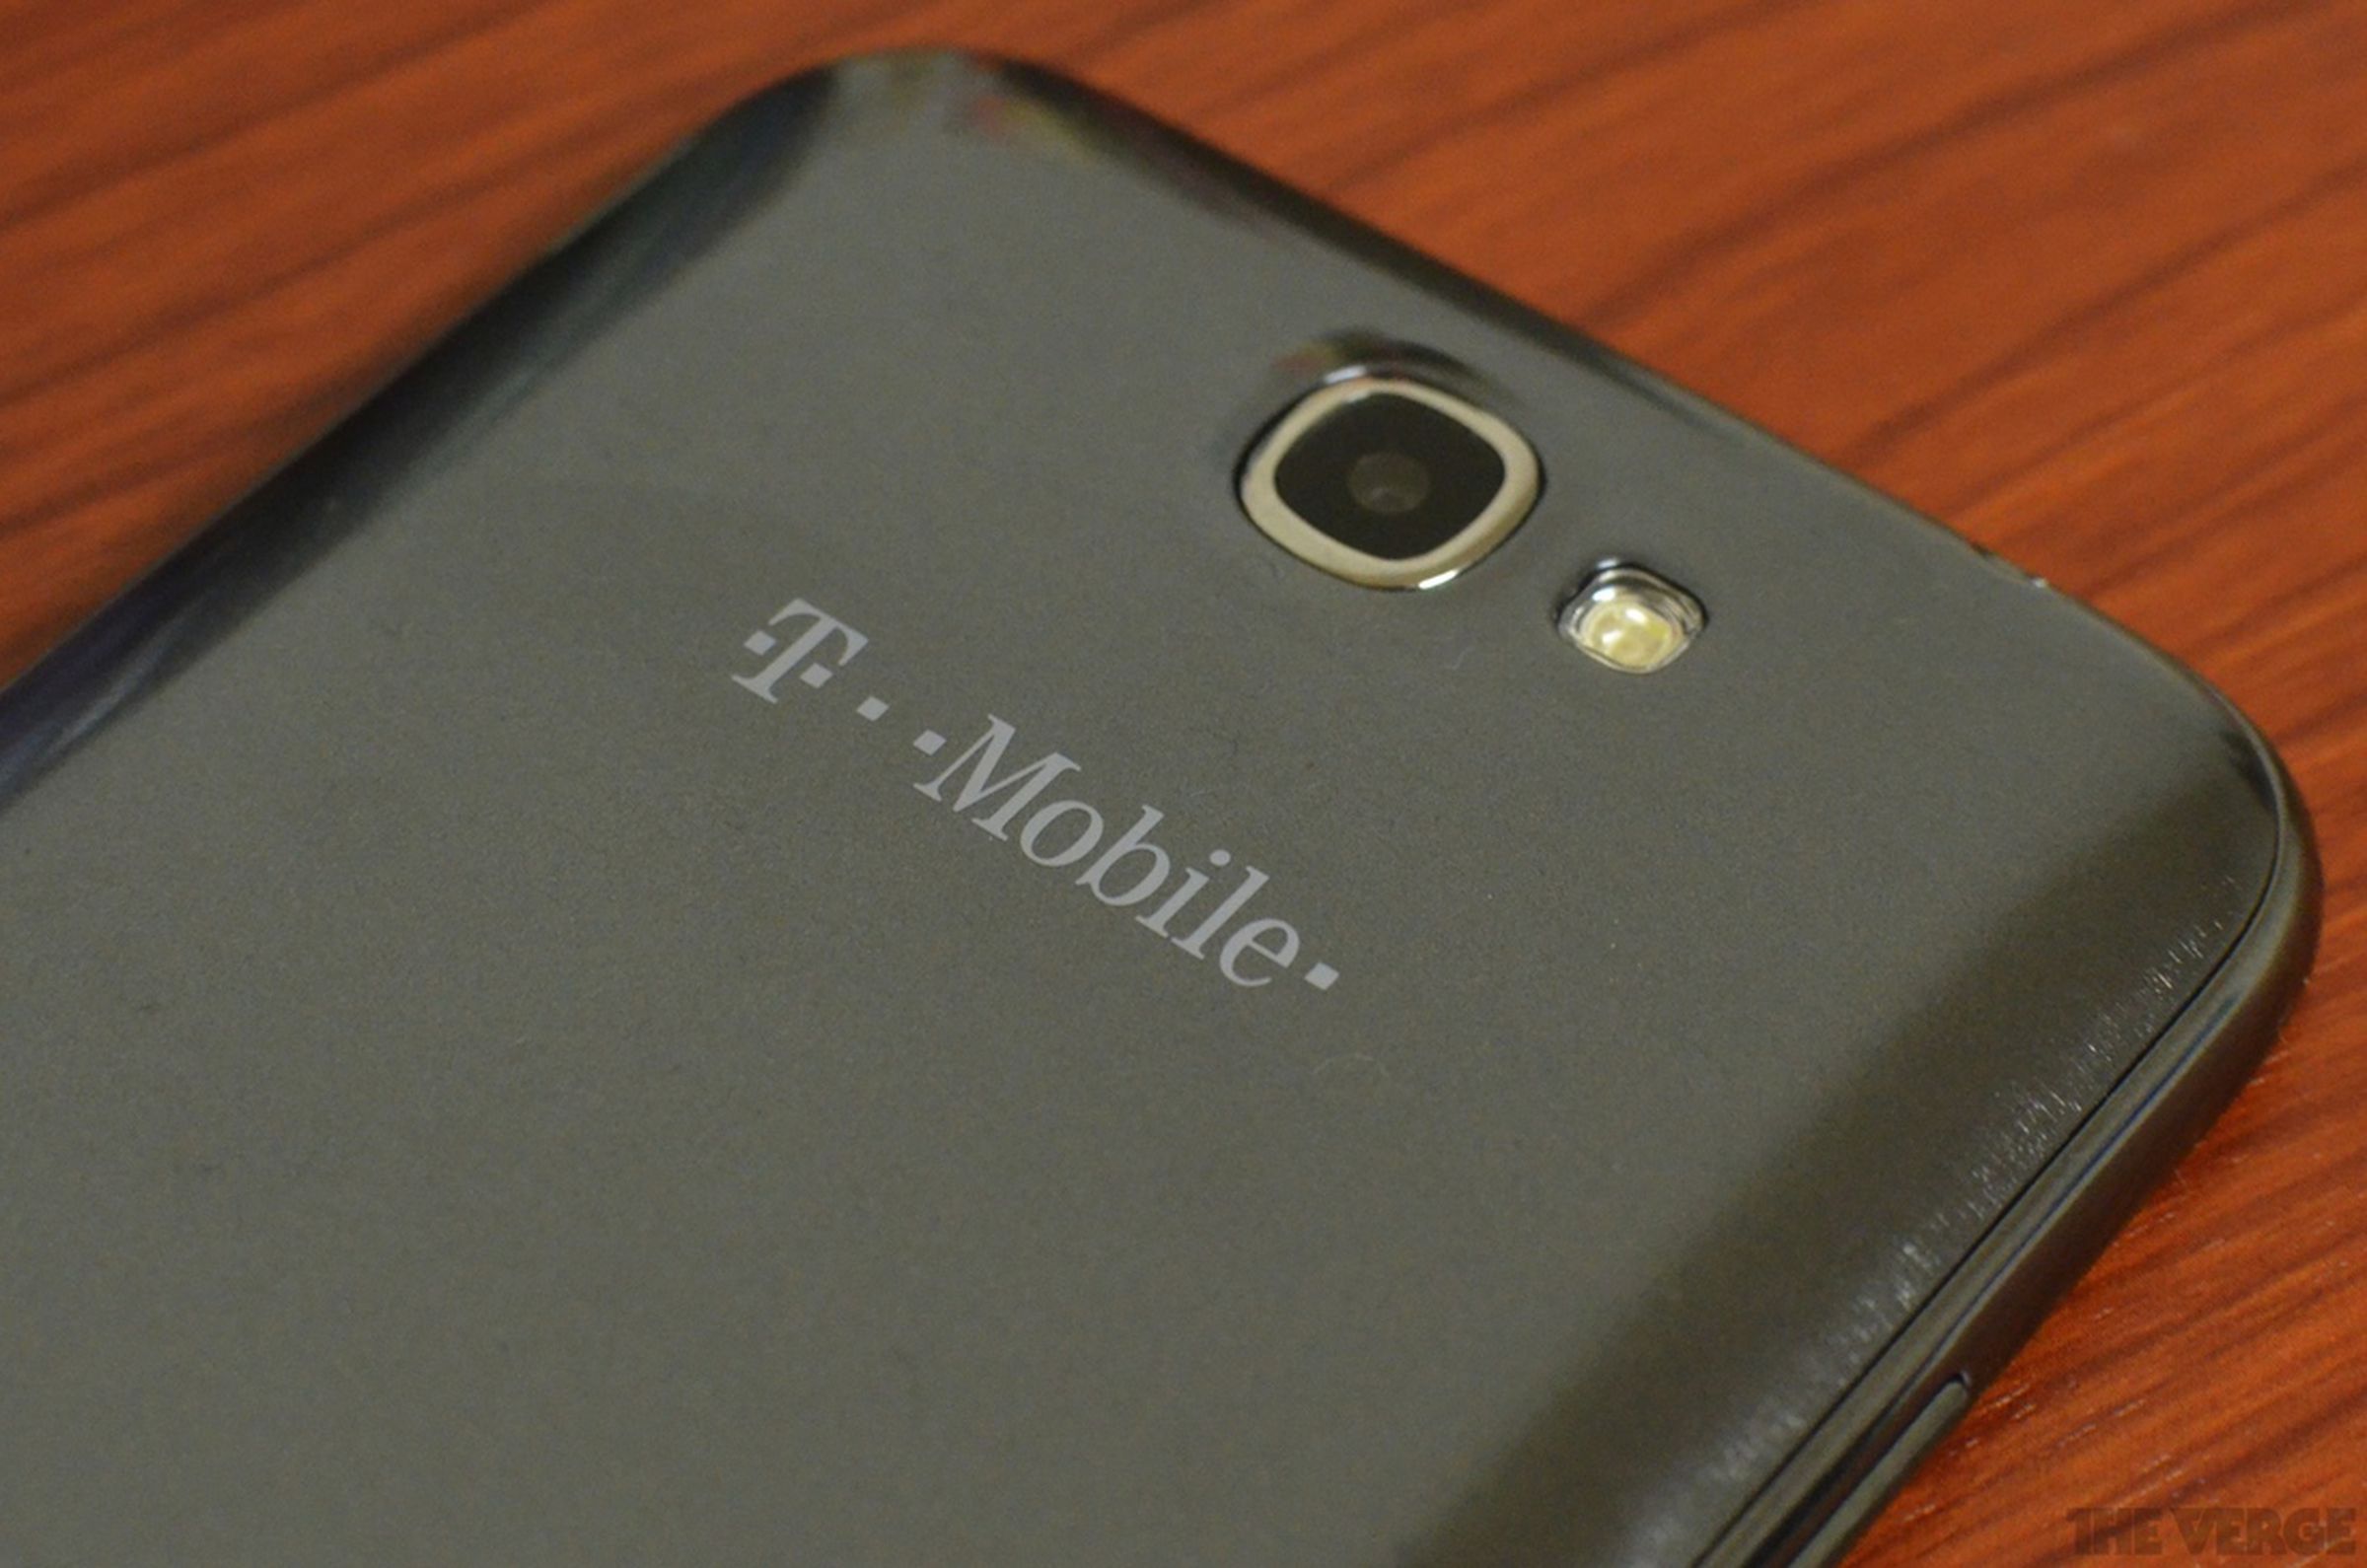 T-Mobile Galaxy Note II photos